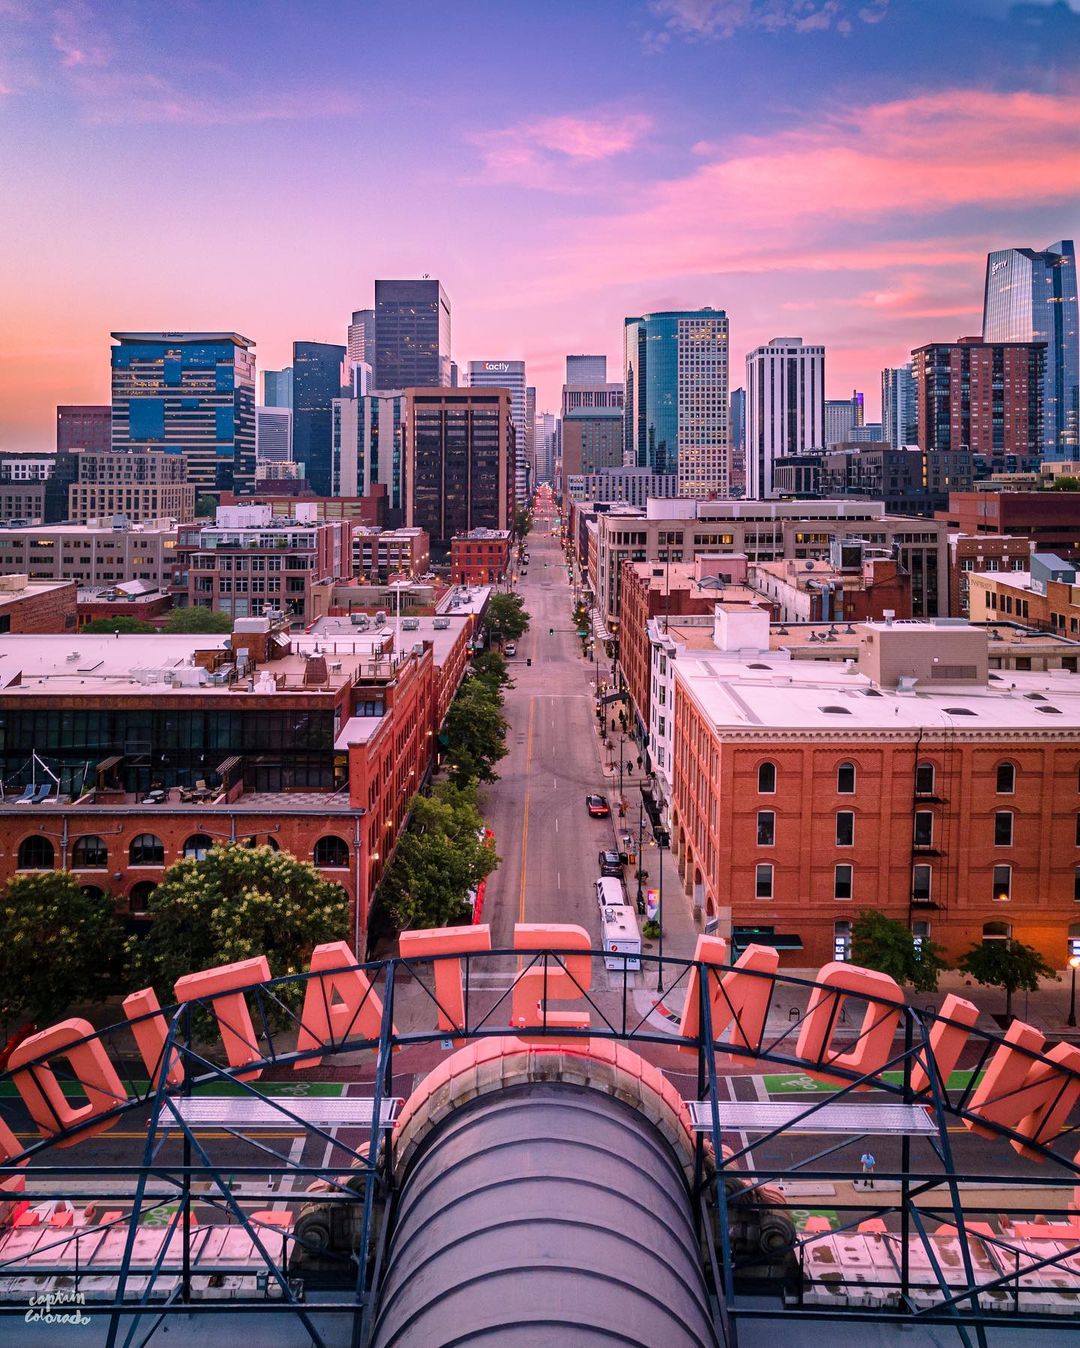 View of Downtown Denver from on top of Union Station. Photo by Instagram user @captaincoloradophotography